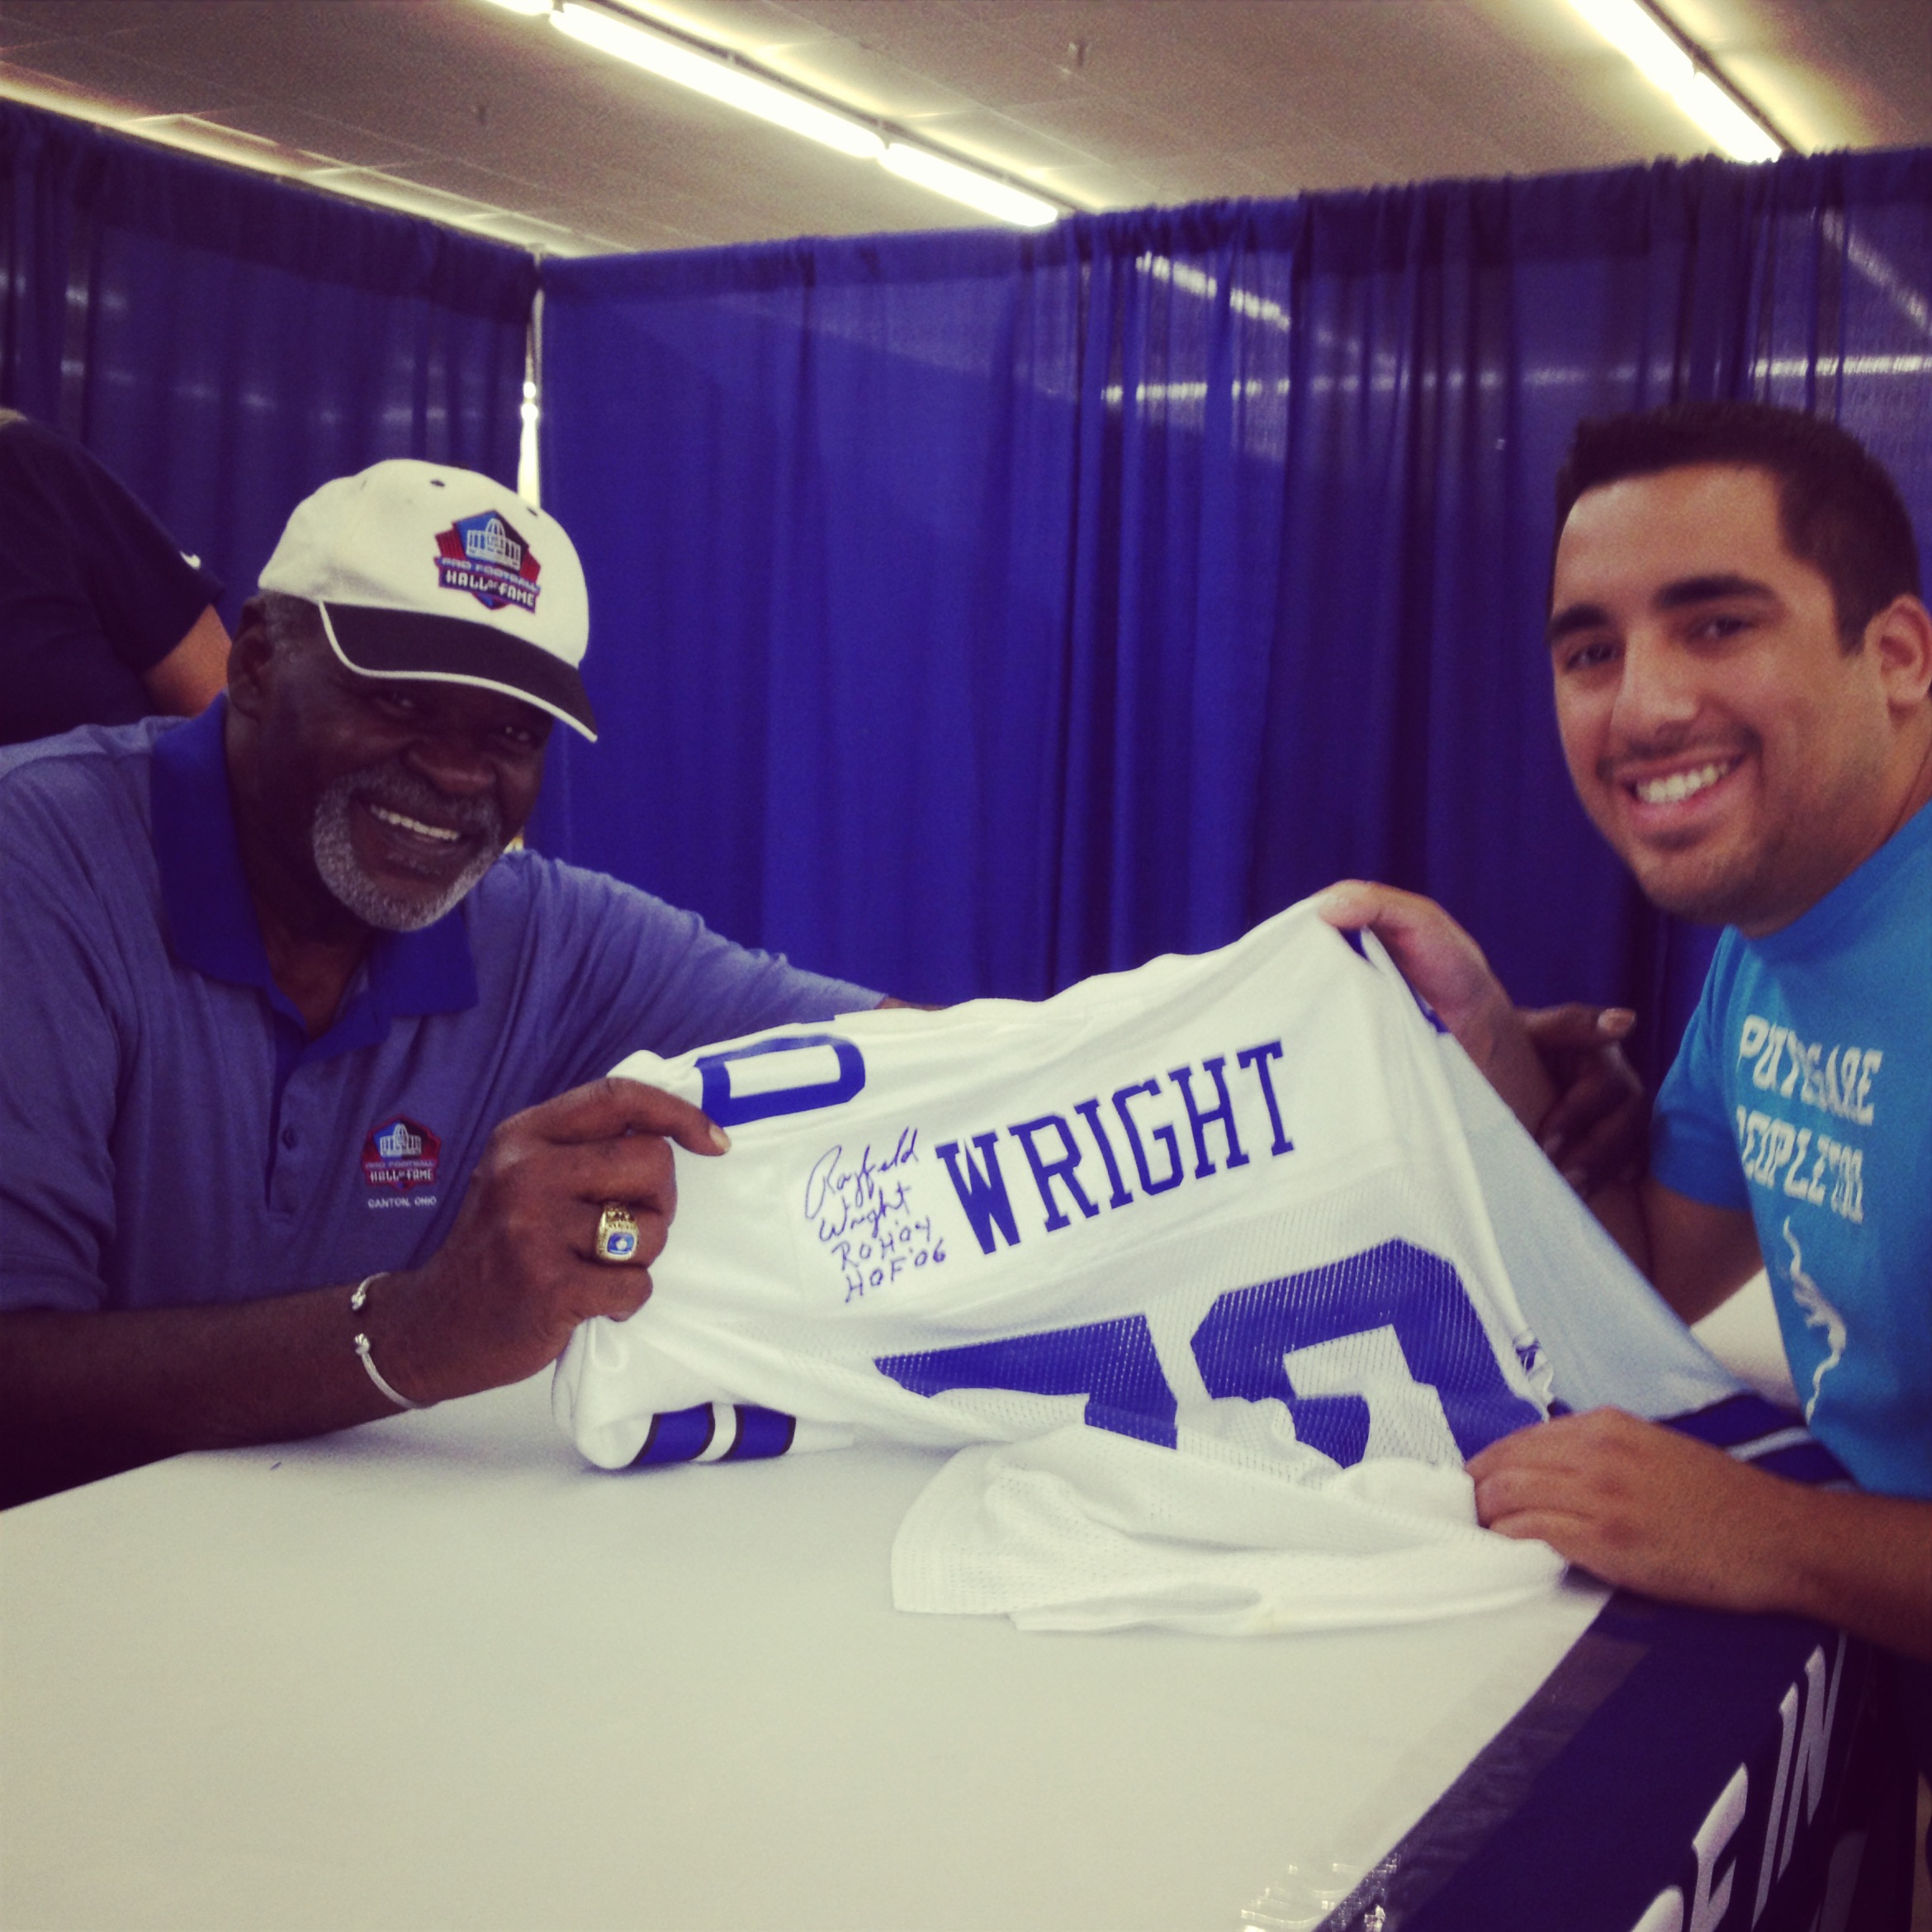 Cowboys Blog - The Wright Stuff: #70, Linemen, and Rayfield 4